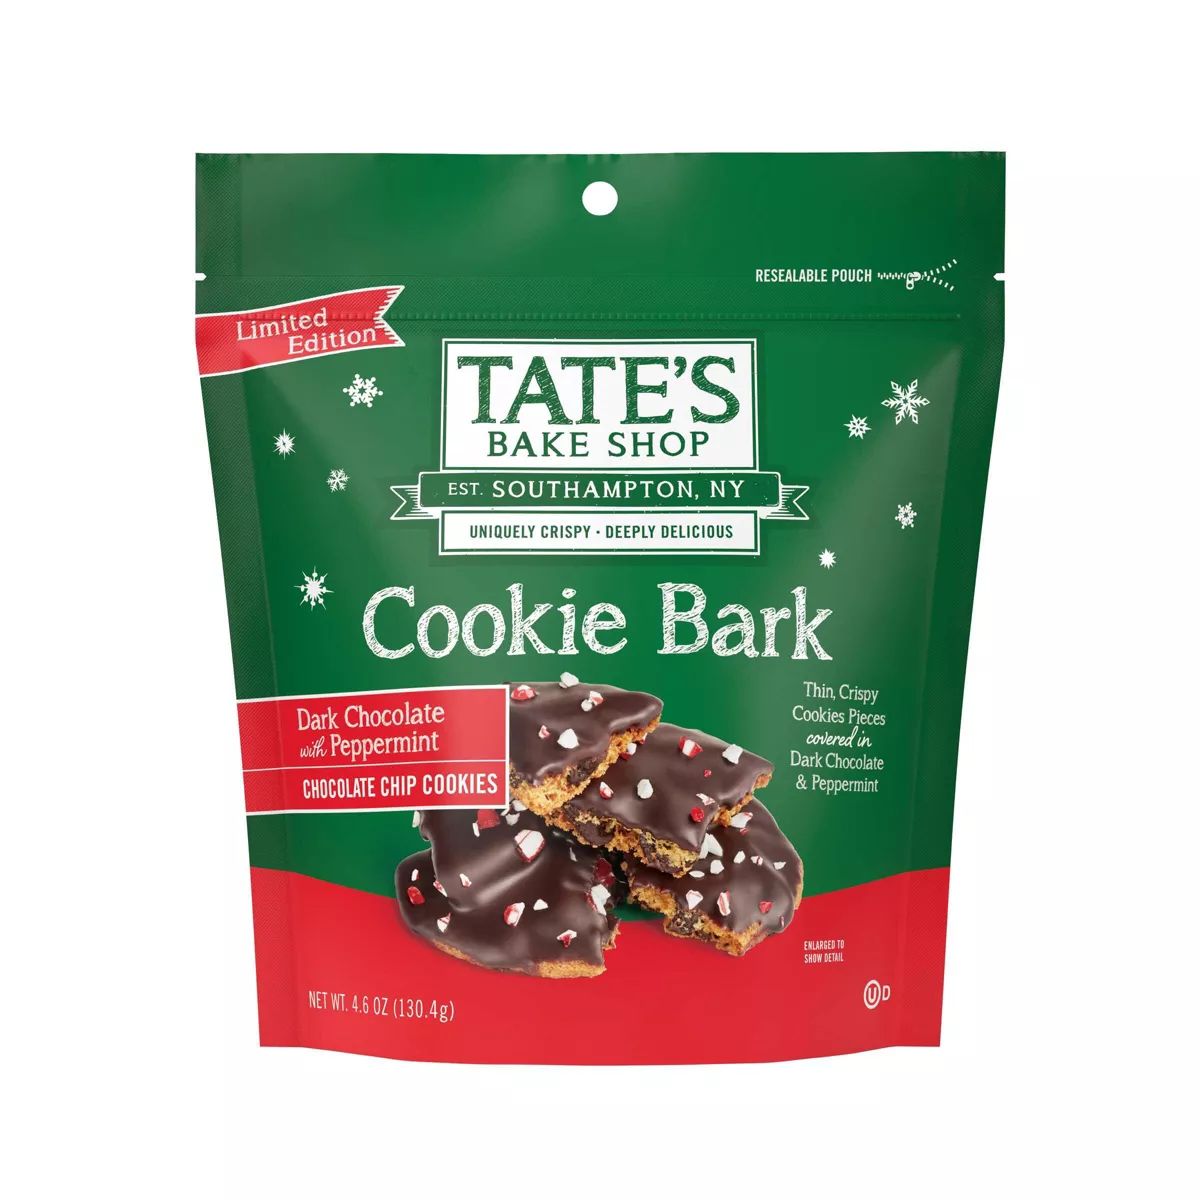 Tate's Bake Shop Cookie Bark Dark Chocolate with Peppermint - 4.6oz | Target